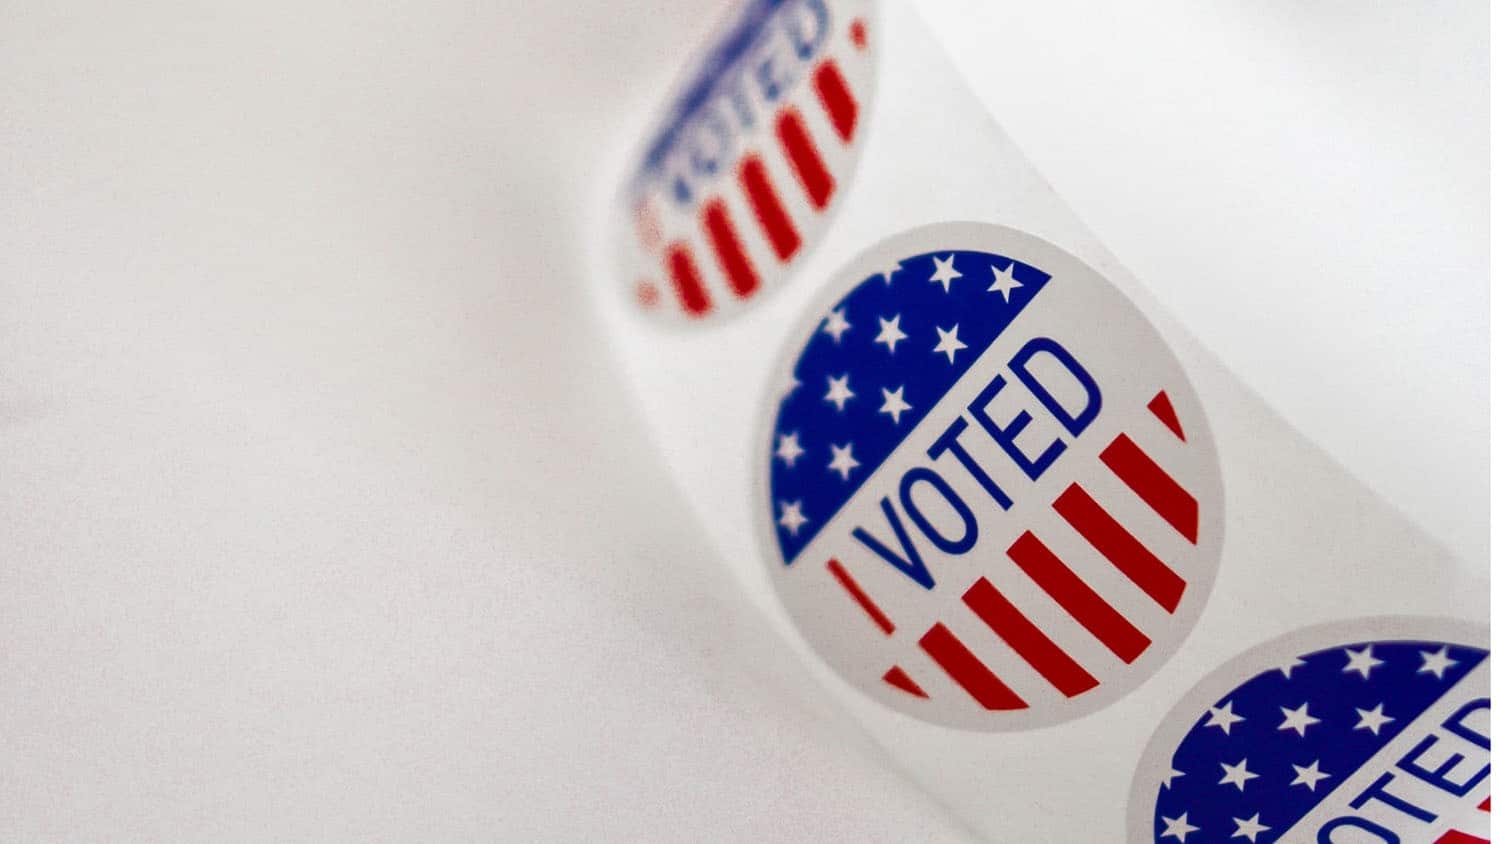 a roll of stickers that say "I Voted" is unfurled across a white background